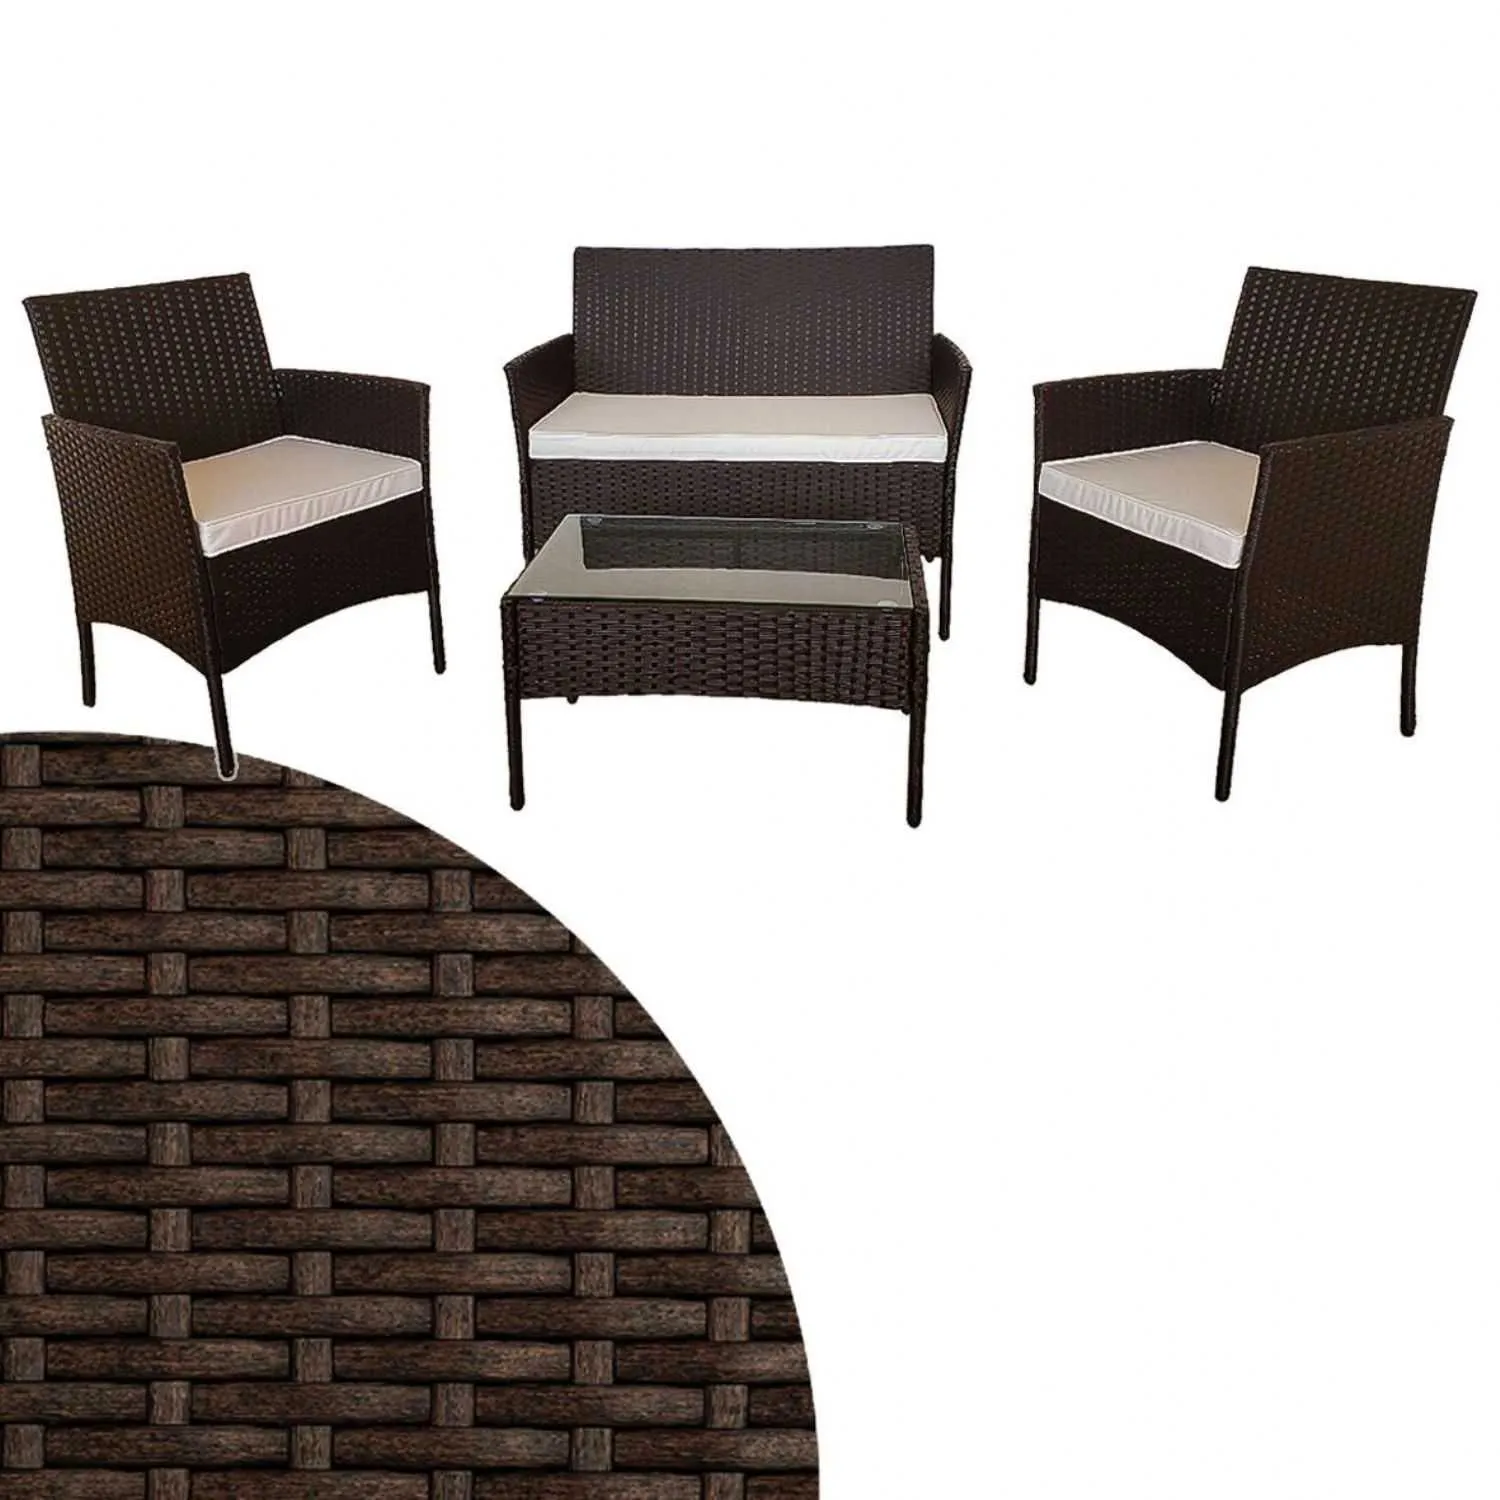 Bali 4 Seater Rattan Garden Set In Brown With Cream Cushions